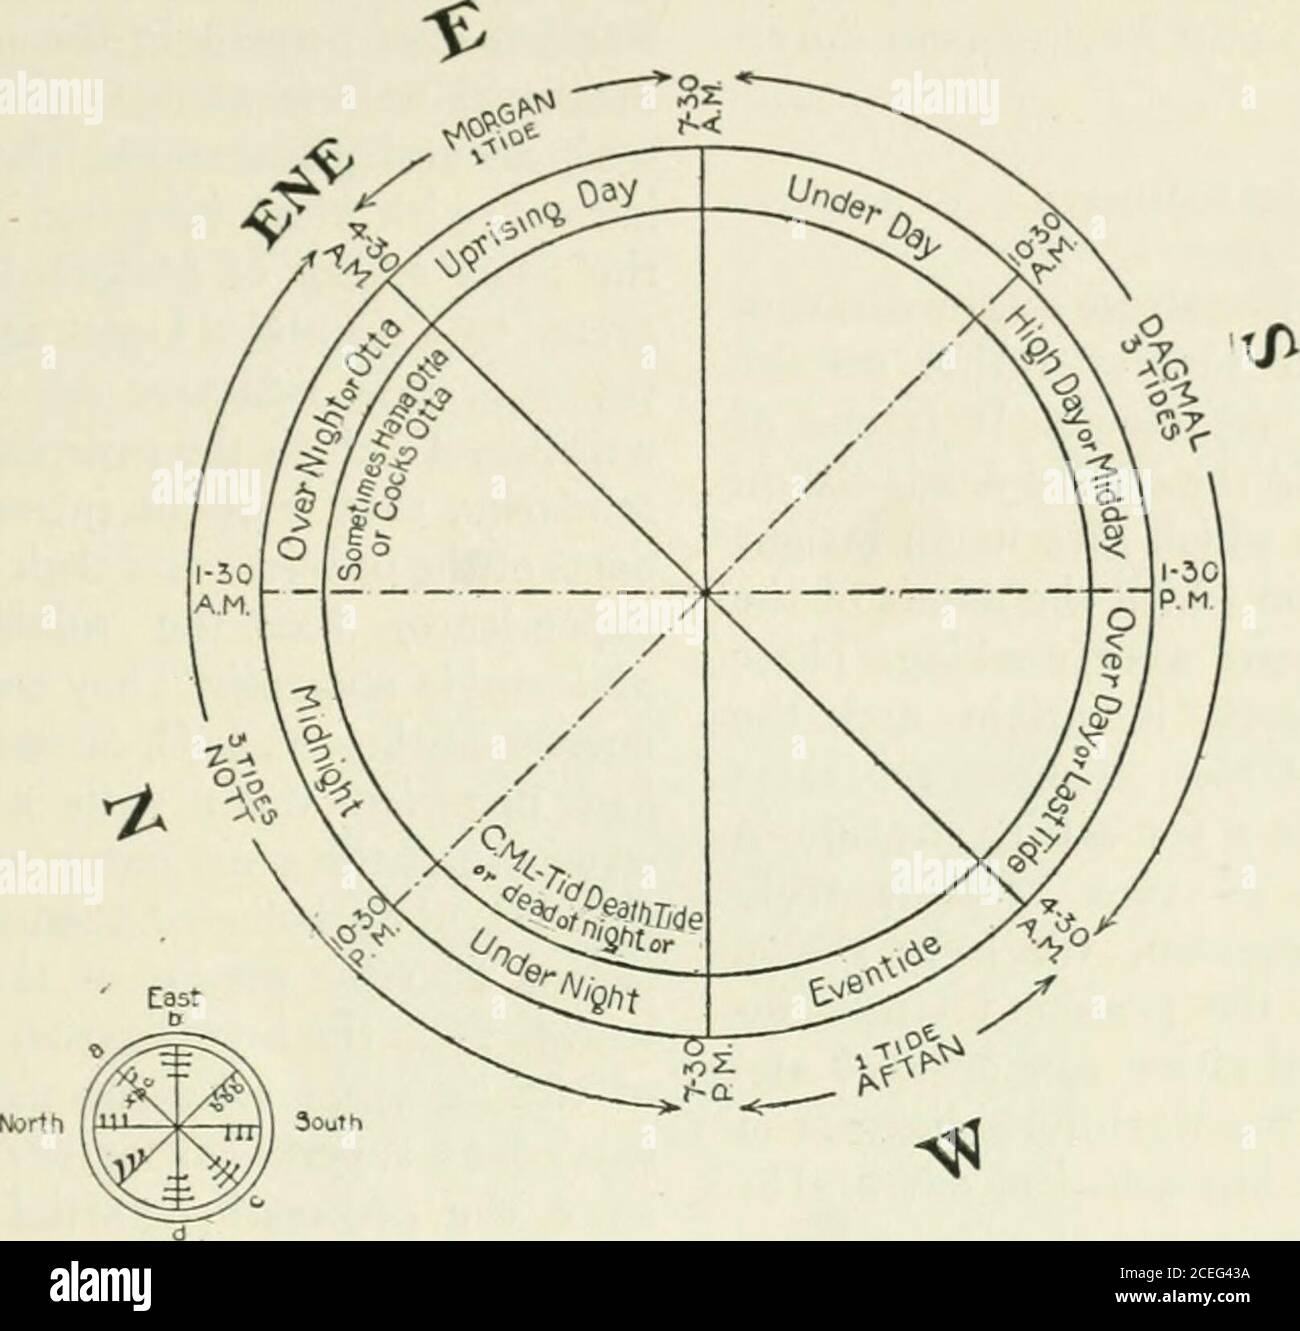 Annals of medical history. tral circle and those in the transverse barabove  it. The central circle of the diagramappears to represent the division of  timeof the Anglo-Saxon sundial. On that in-strument